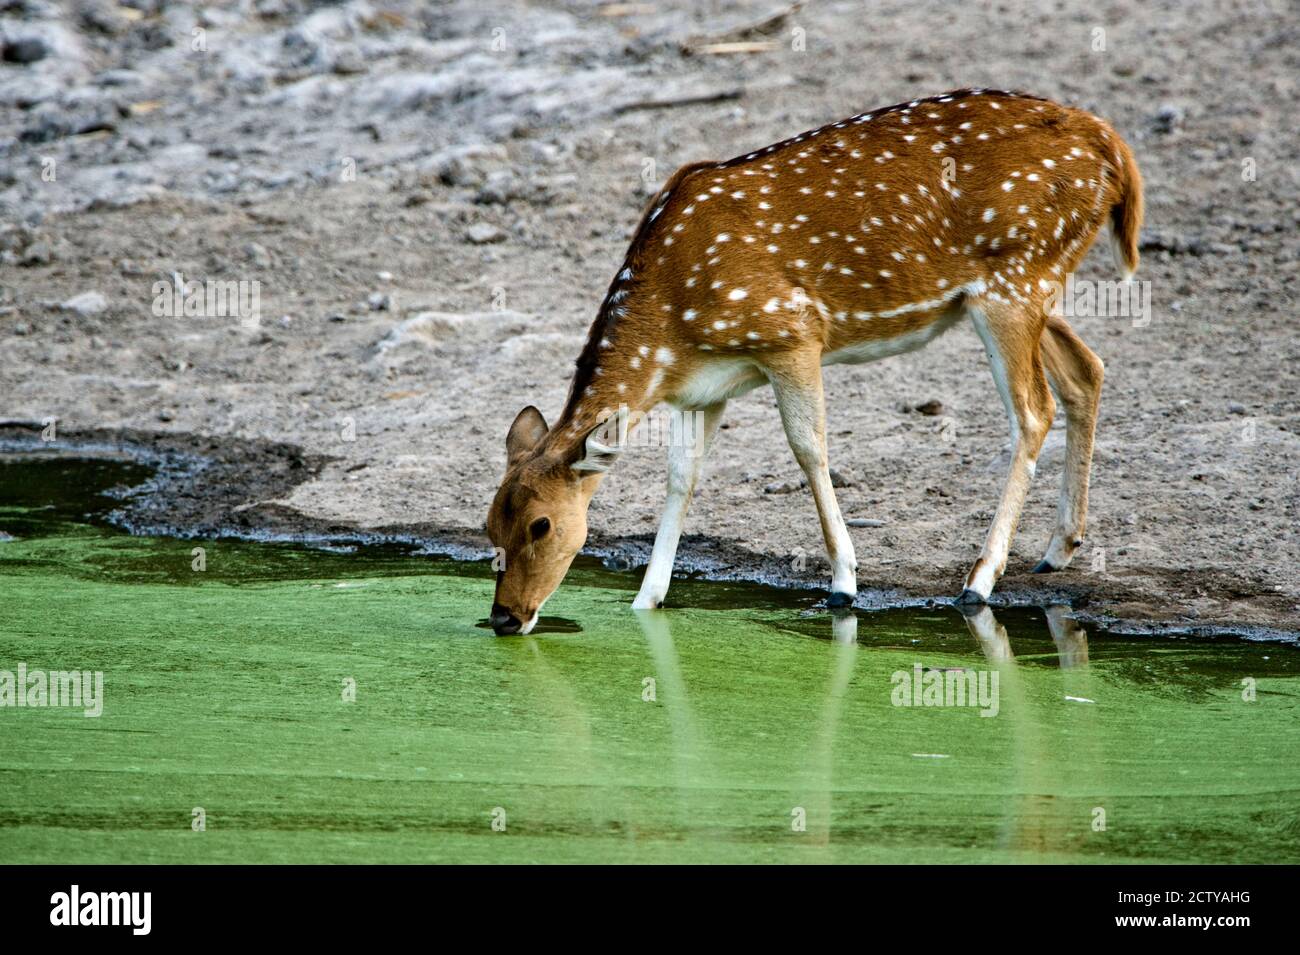 Spotted deer (Axis axis) drinking water from a lake, Bandhavgarh National Park, Umaria District, Madhya Pradesh, India Stock Photo